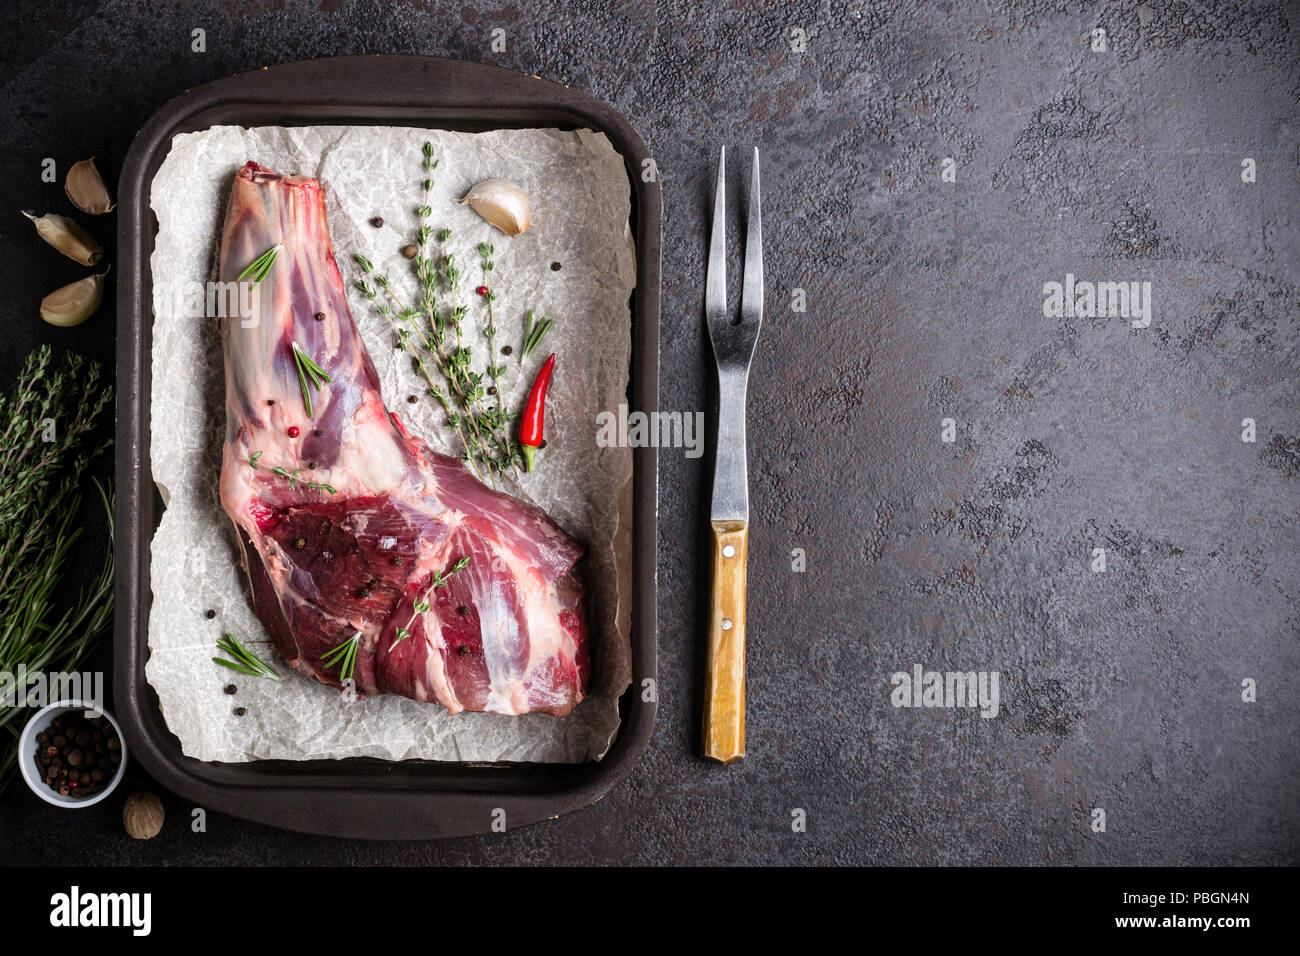 Raw fresh Lamb Meat shank, herbs and fork on black stone background. Stock Photo